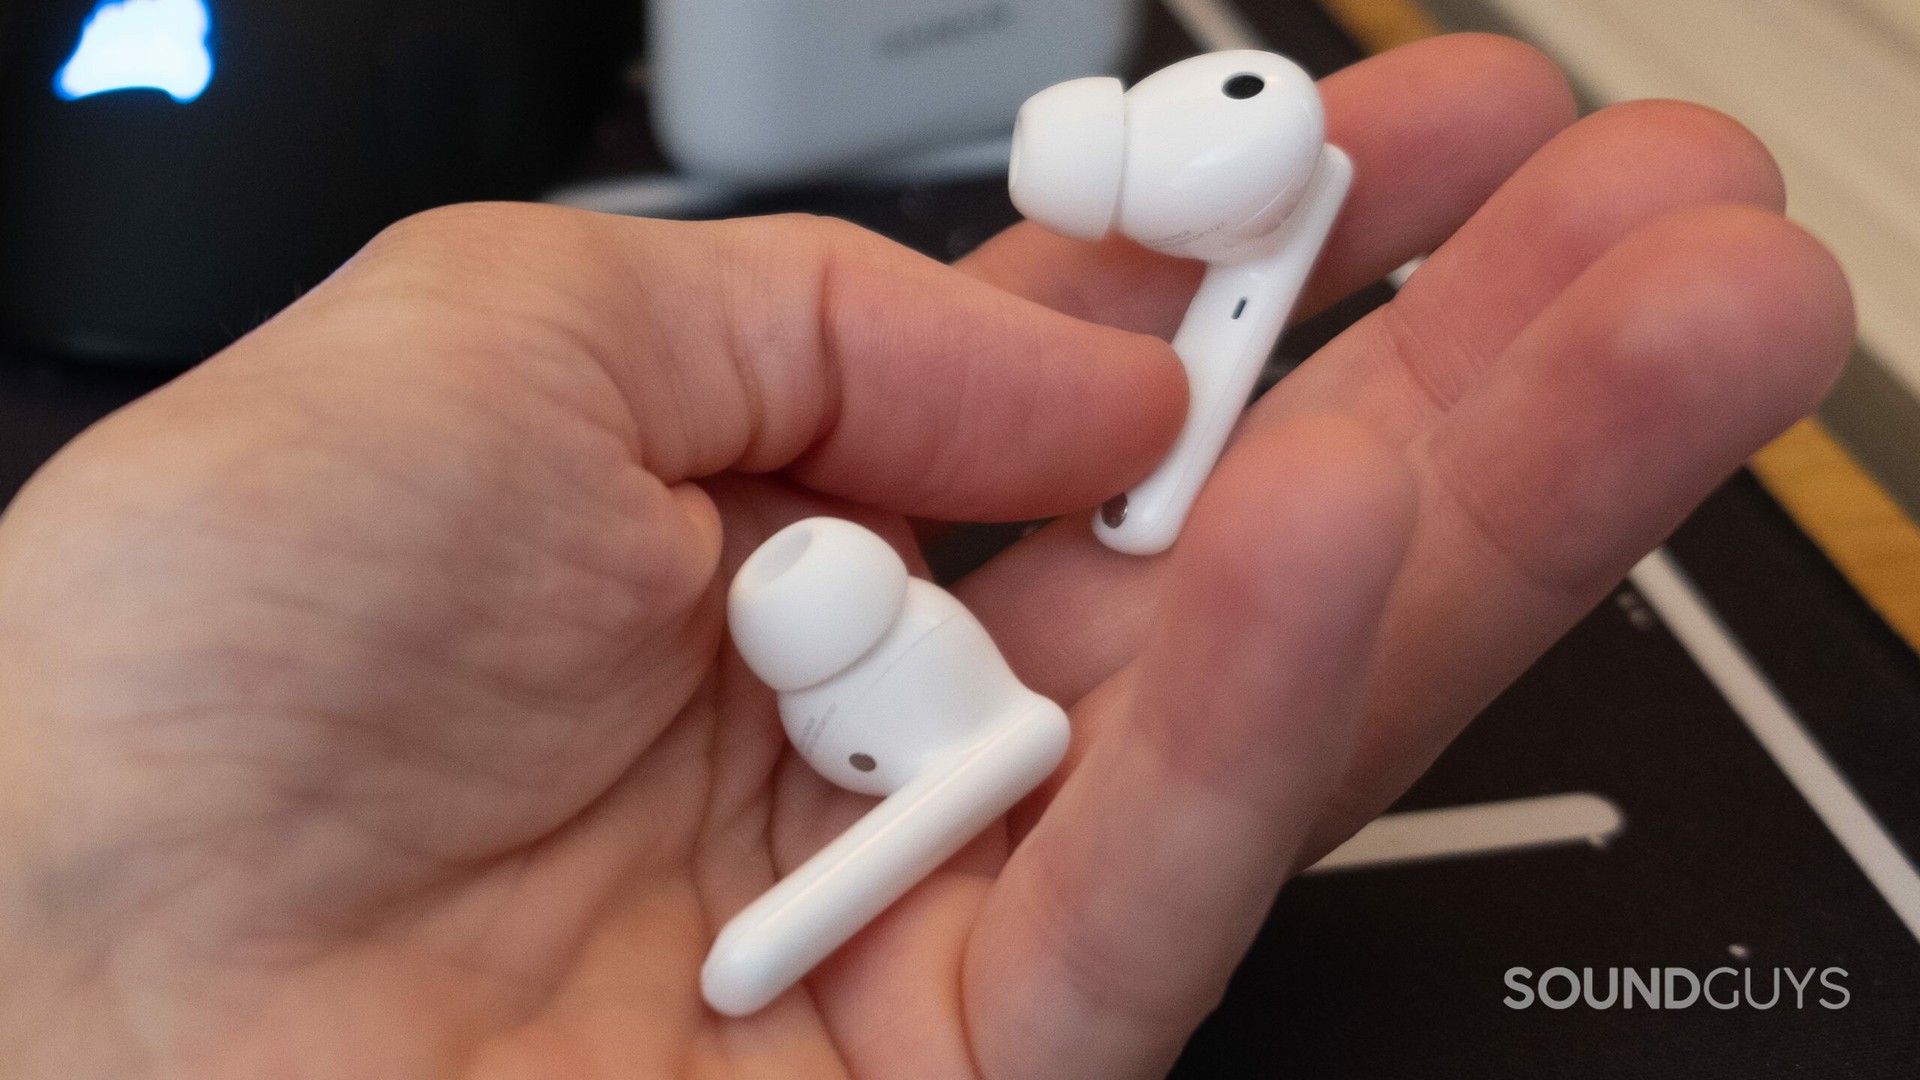 An image of the Honor Earbuds 2 Lite in hand without the case